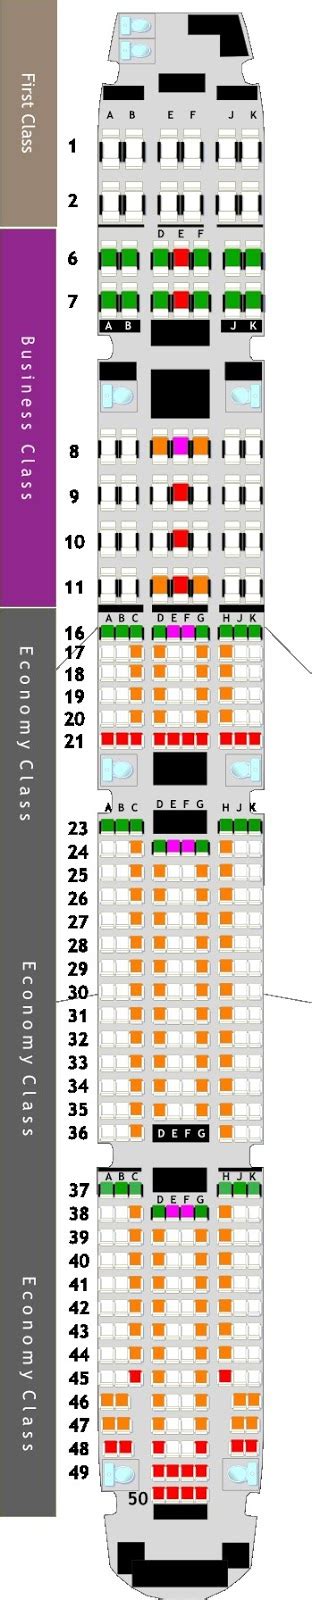 Emirates Boeing 777 300er Seating Chart Hot Sex Picture